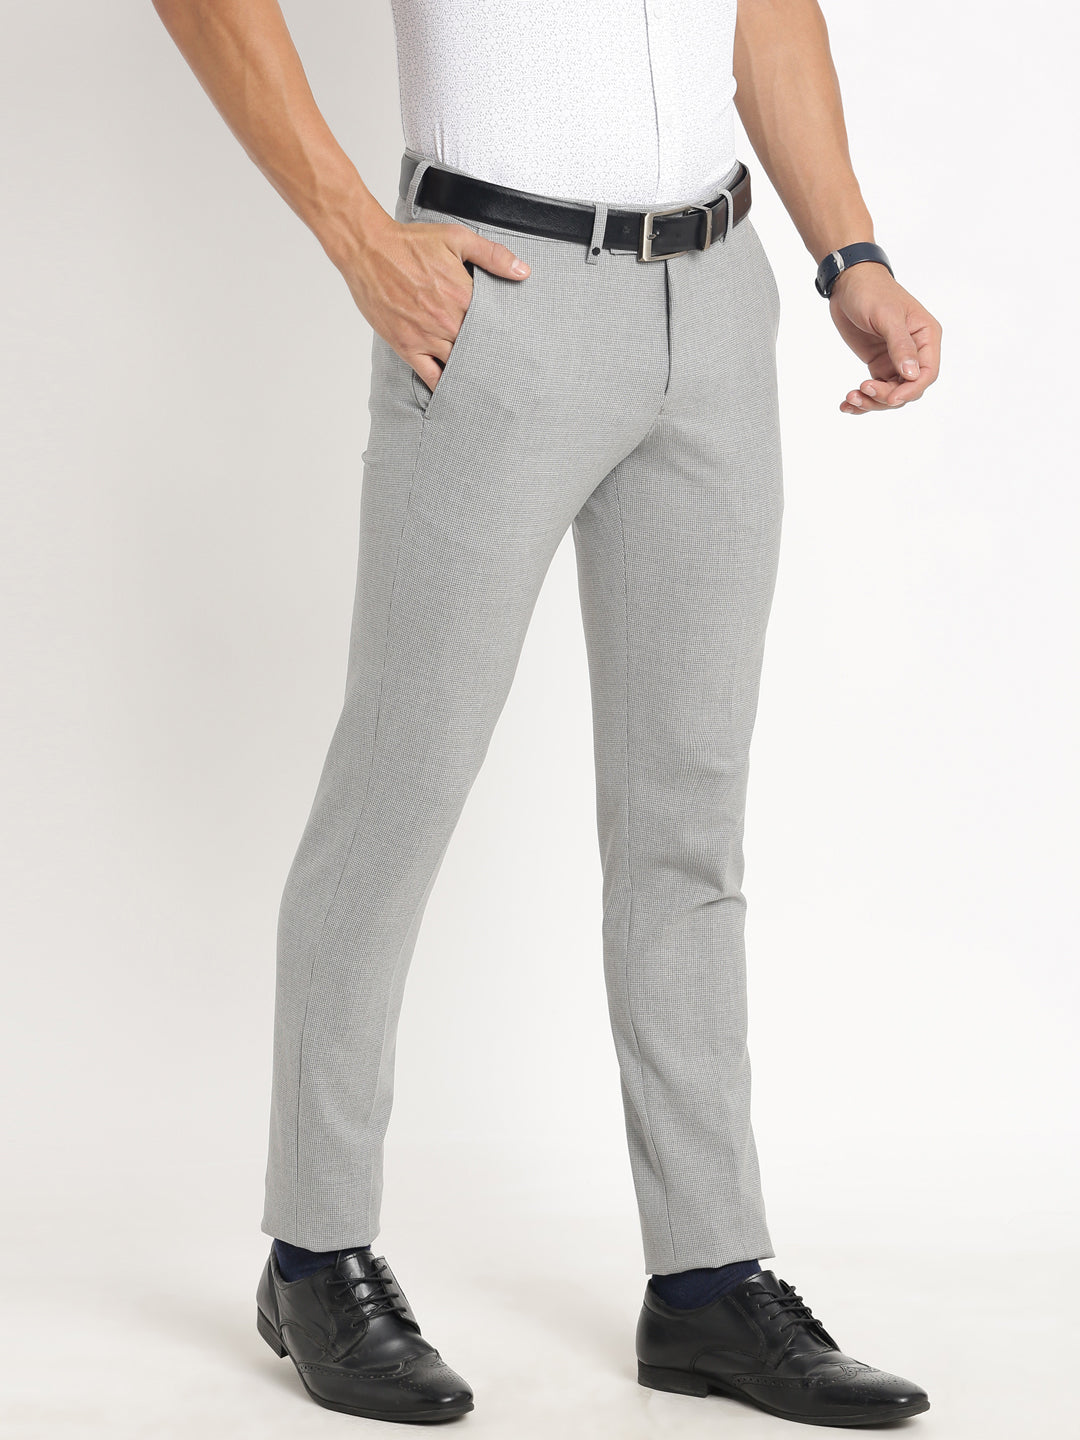 Cotton Stretch Grey Dobby Ultra Slim Fit Flat Front Formal Trouser